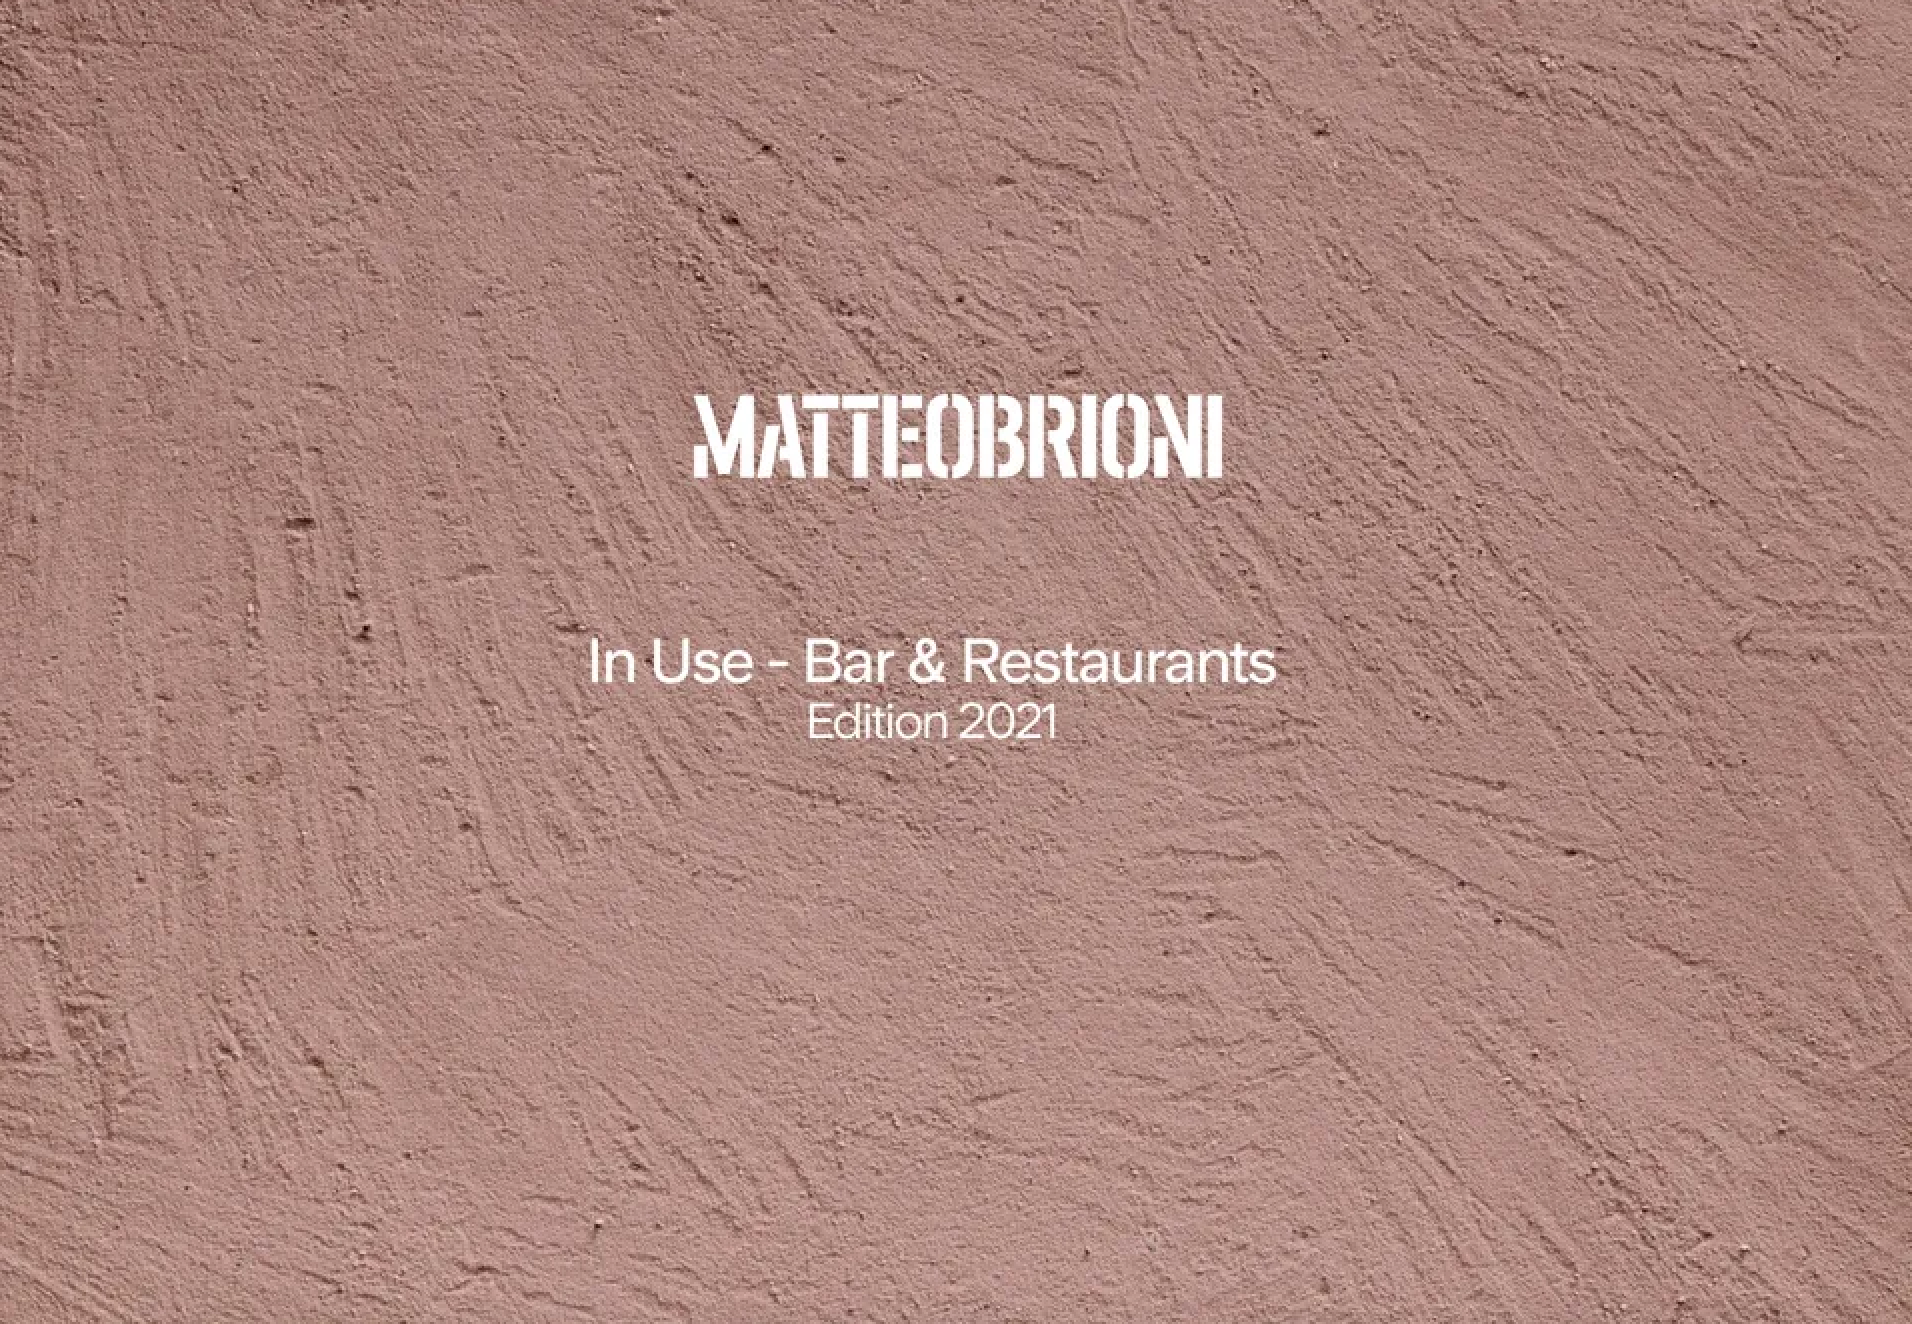 Matteo Brioni - In Use Bars and Restaurants